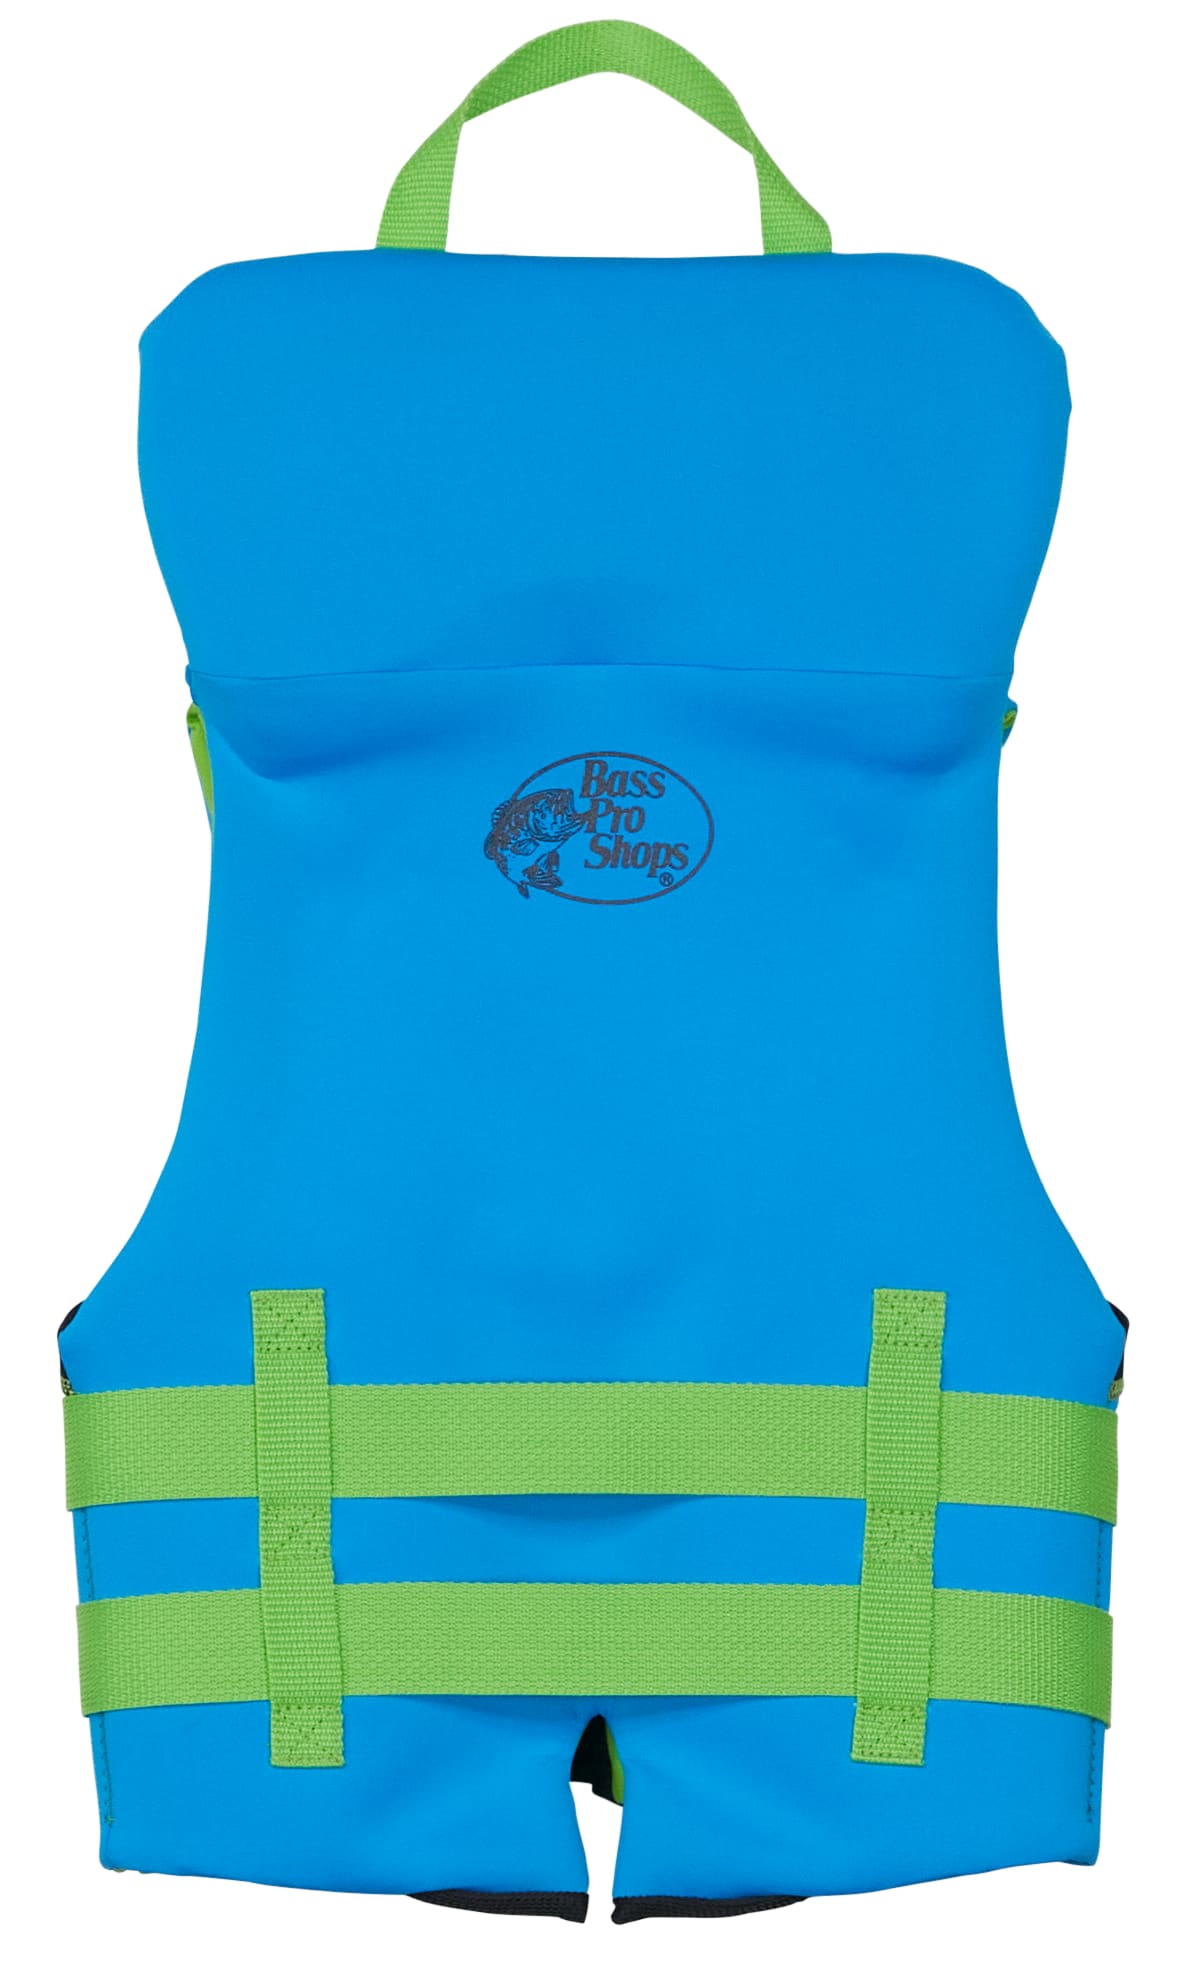 Bass Pro Shops® Neoprene Life Vest for Children and Youth